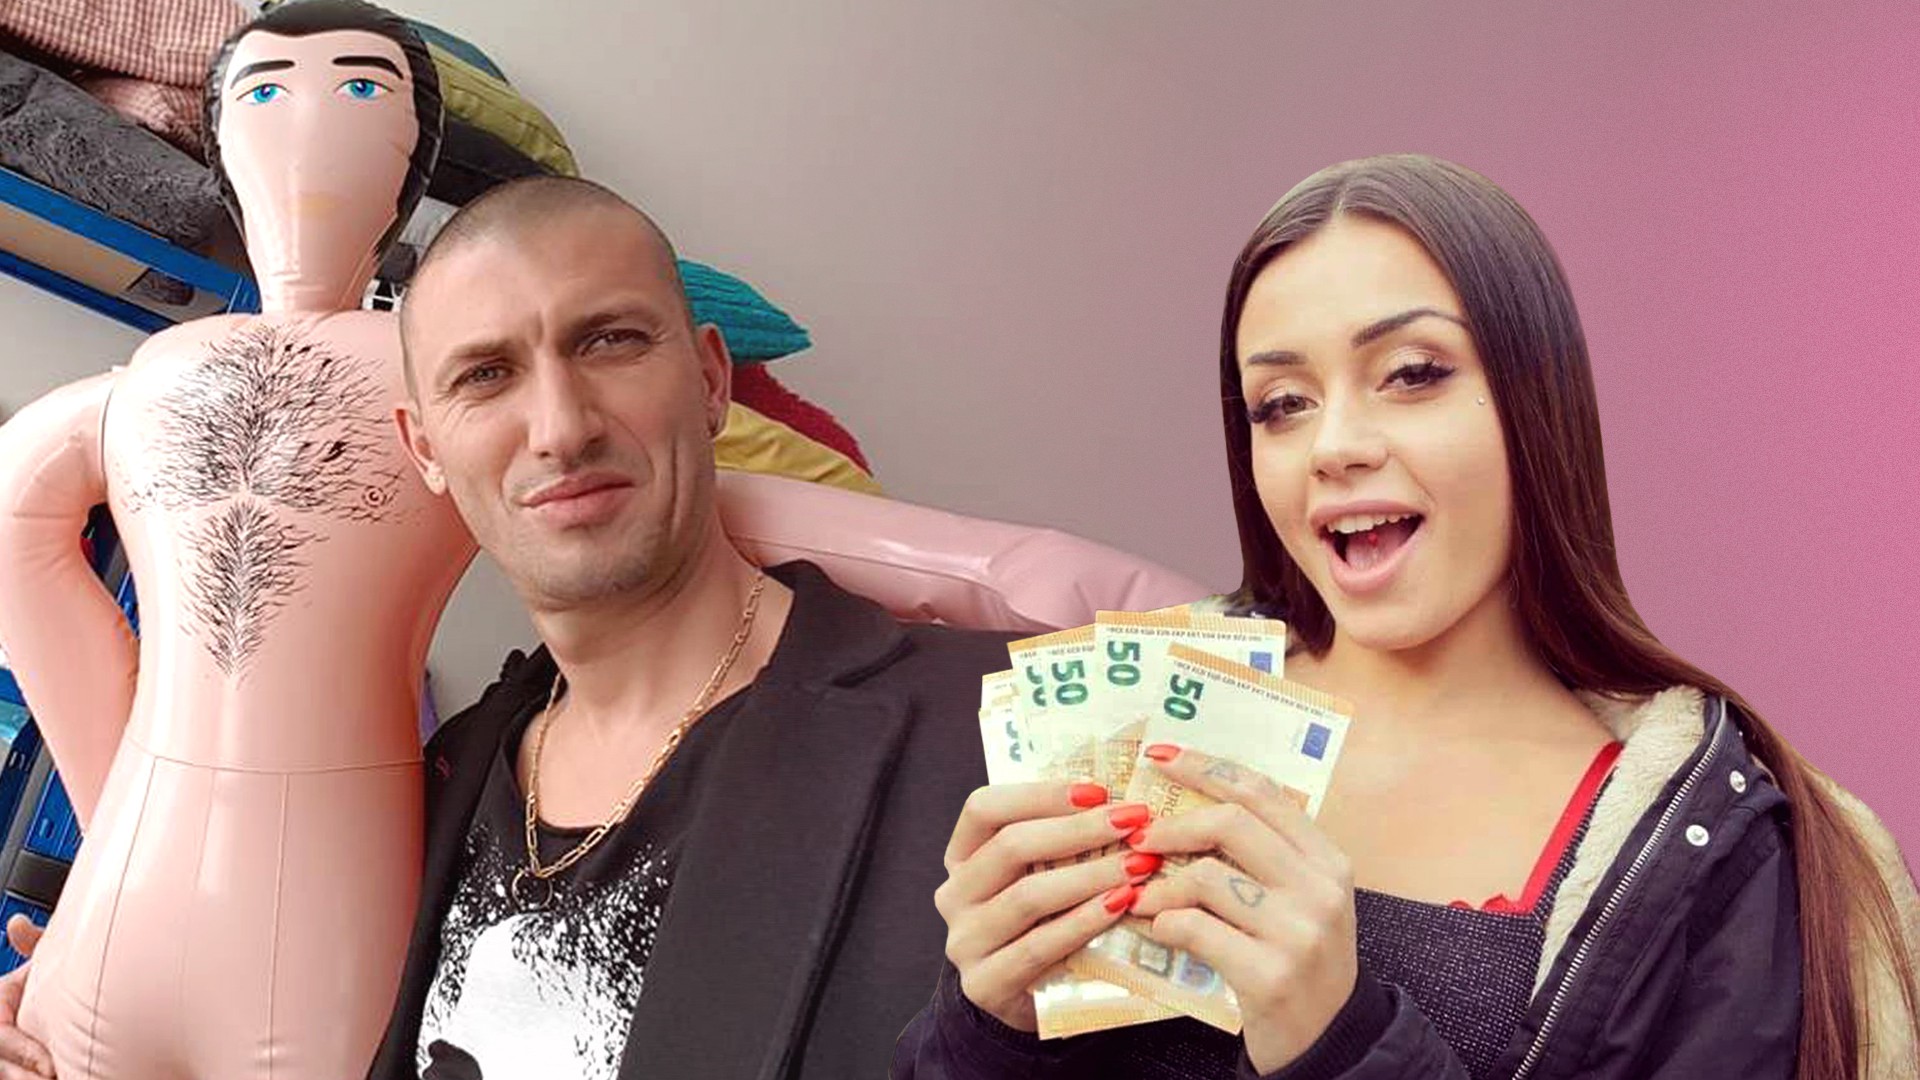 Manke And Girl Xxx - We Asked Porn Stars Much Money They Make - VICE